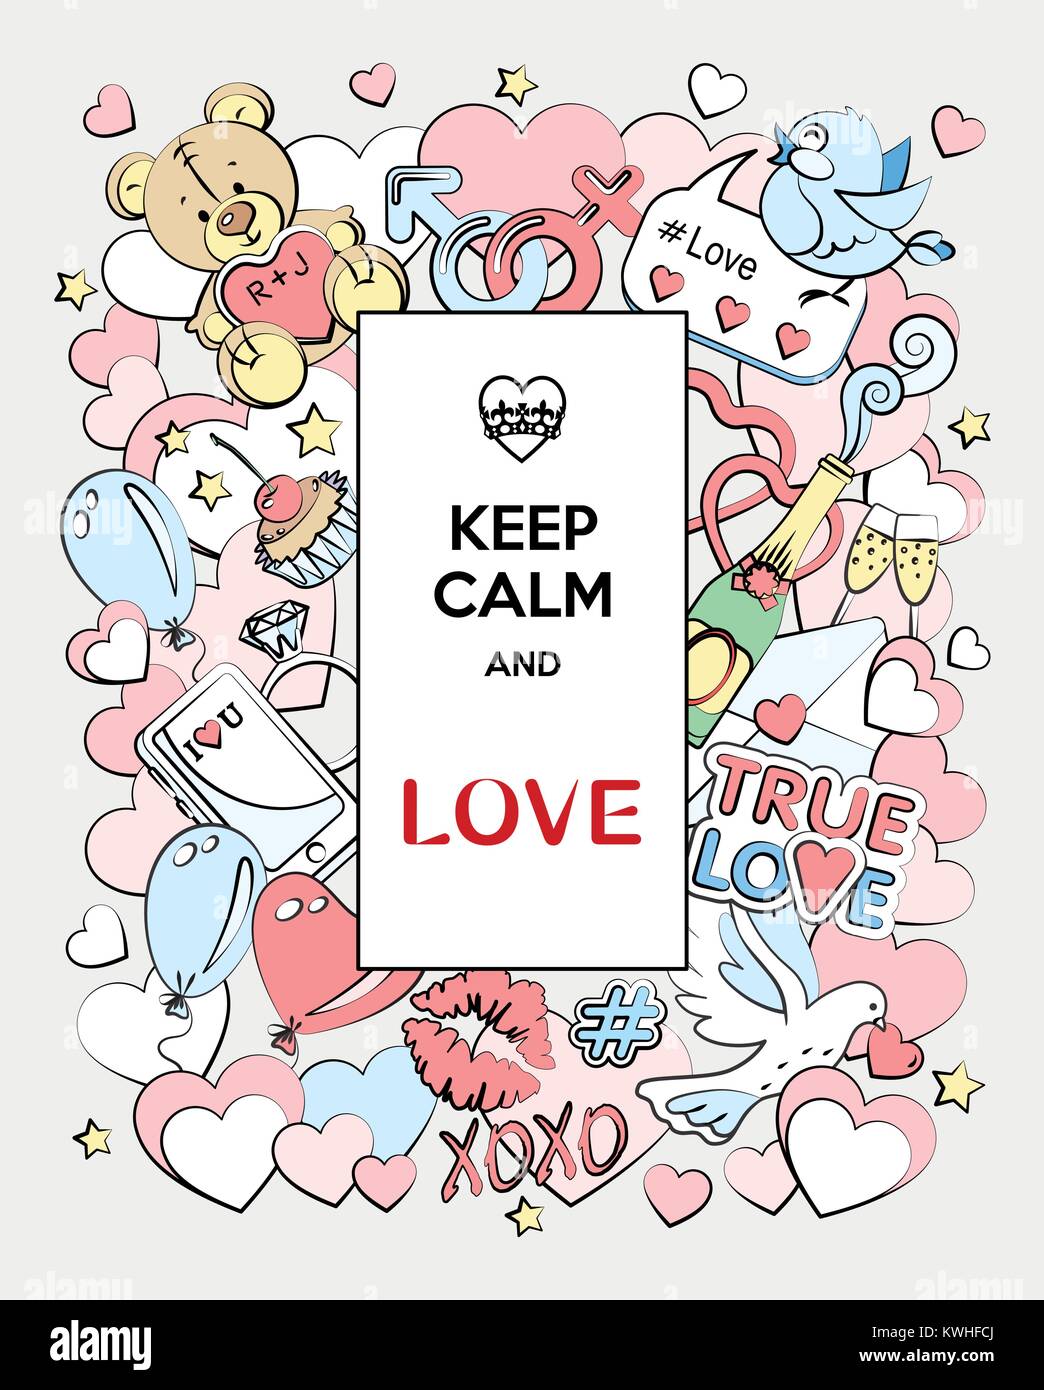 Happy Valentine's Day! Colorful greeting card 'Keep Calm and Love' with cute cartoon characters. Doodles style. All elements are separated. Stock Vector